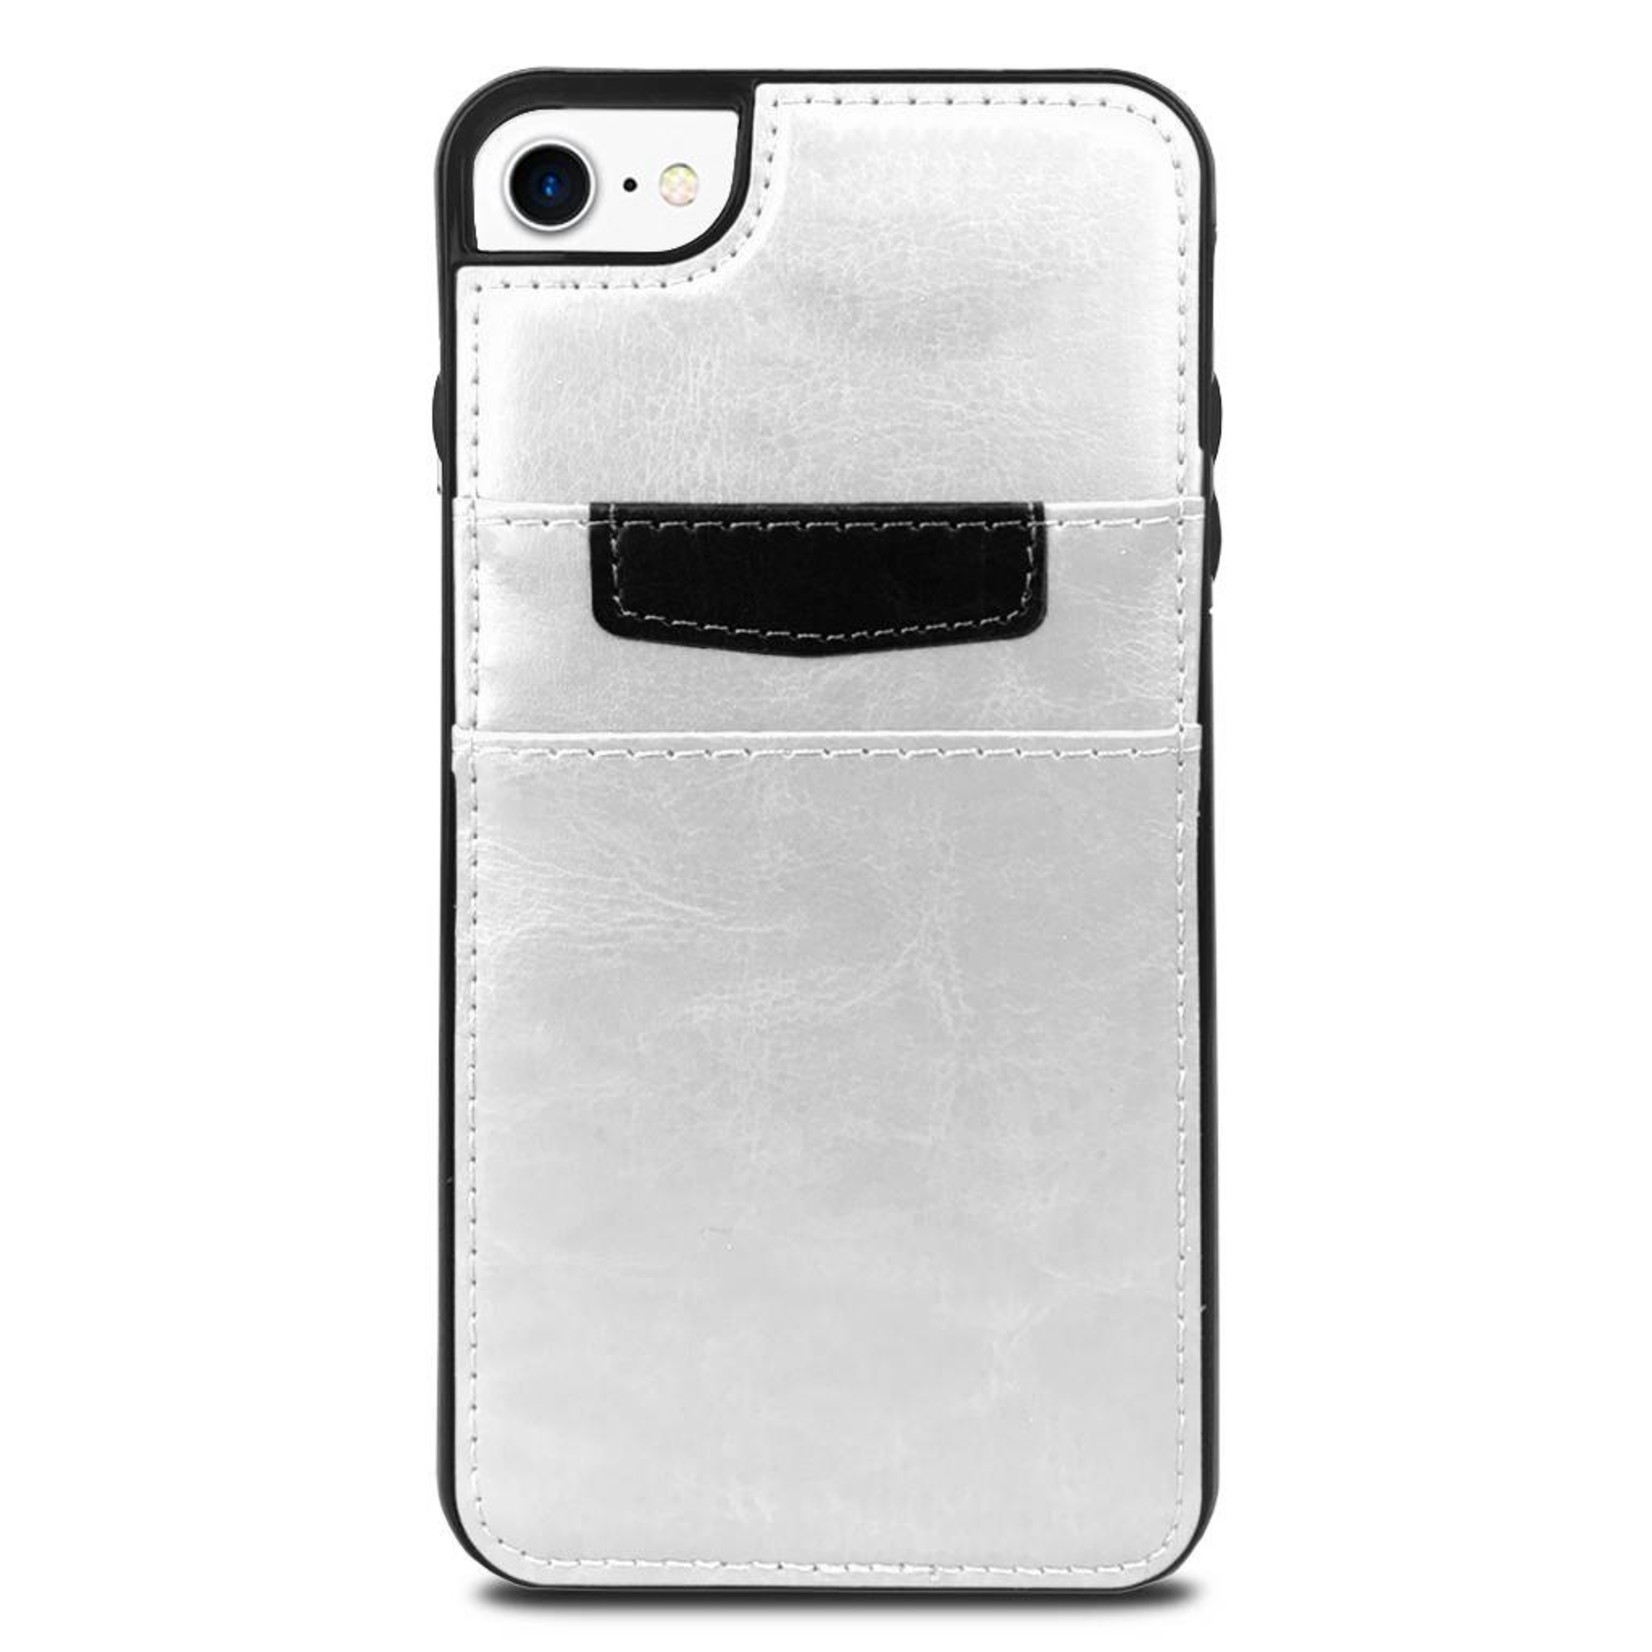 Protective Case Vertical Wallet With 2 Card Slots For iPhone SE (2020) / 8 / 7